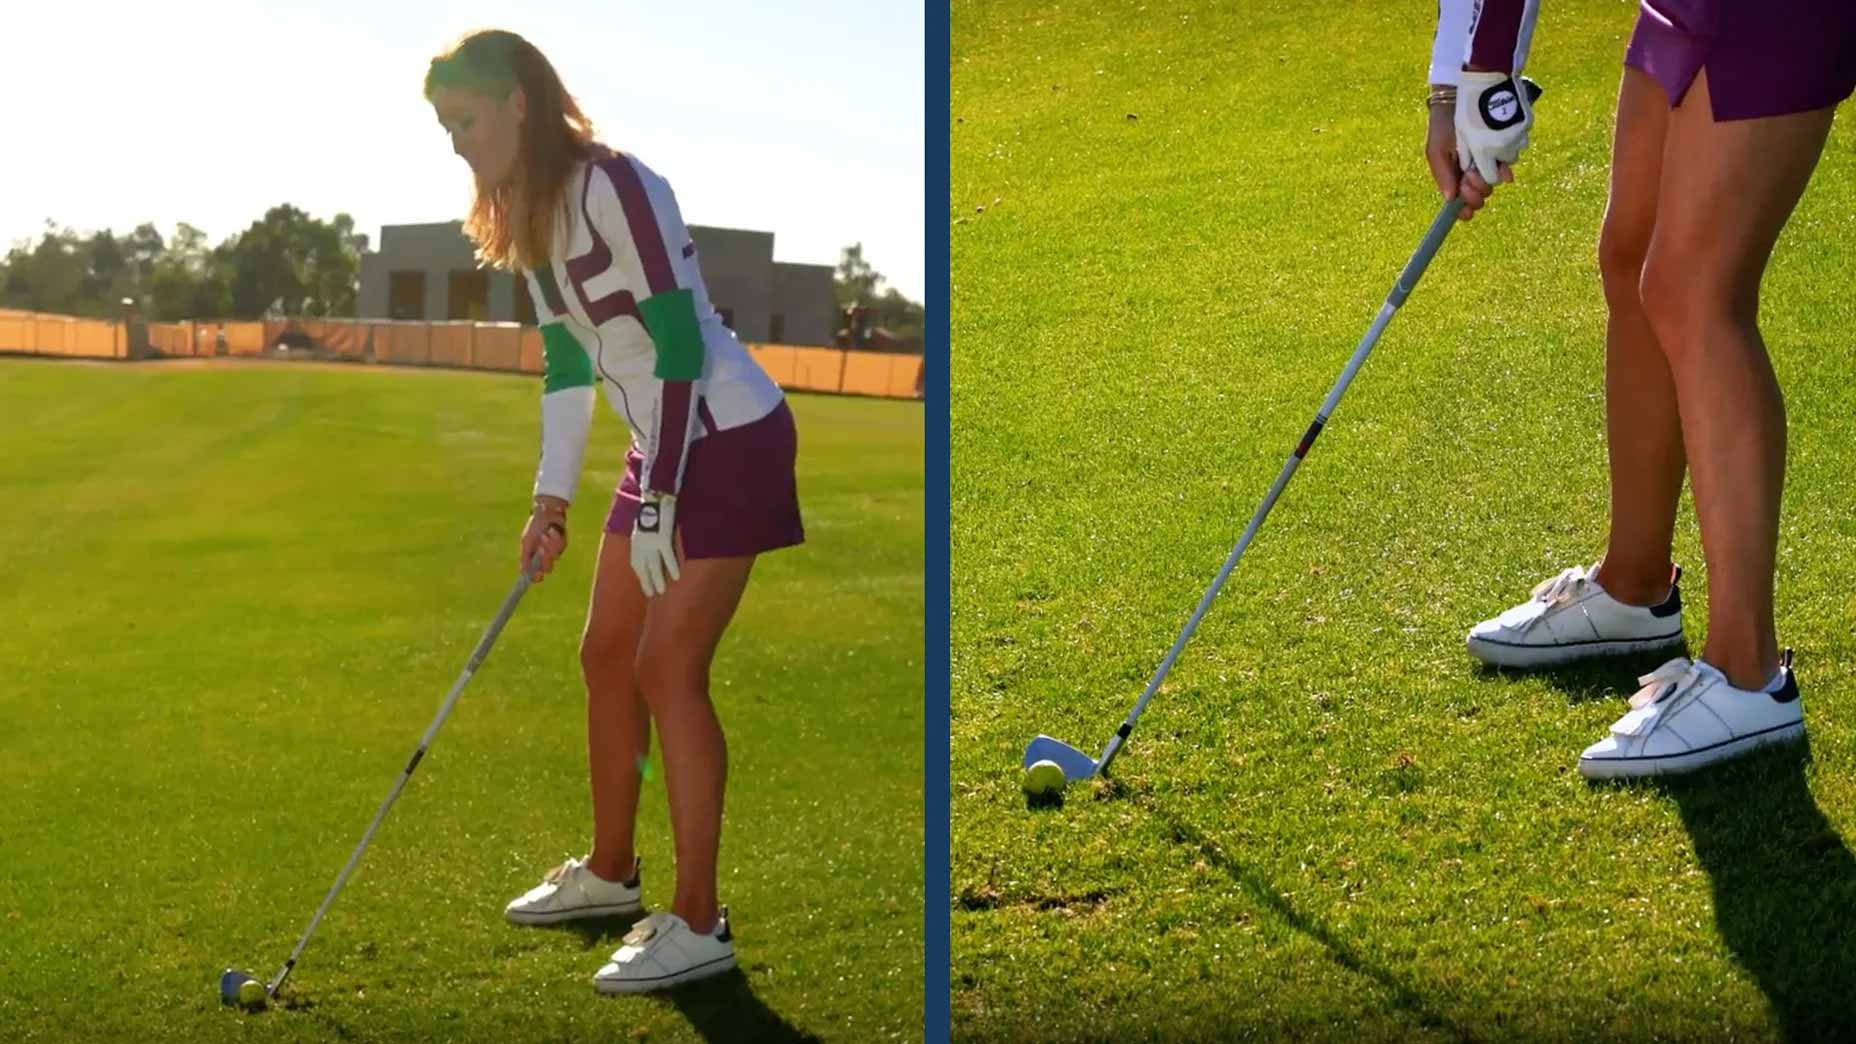 When hitting the golf ball below the feet, GOLF Top 100 Teacher Trillium Rose said to focus on these easy setup for better results